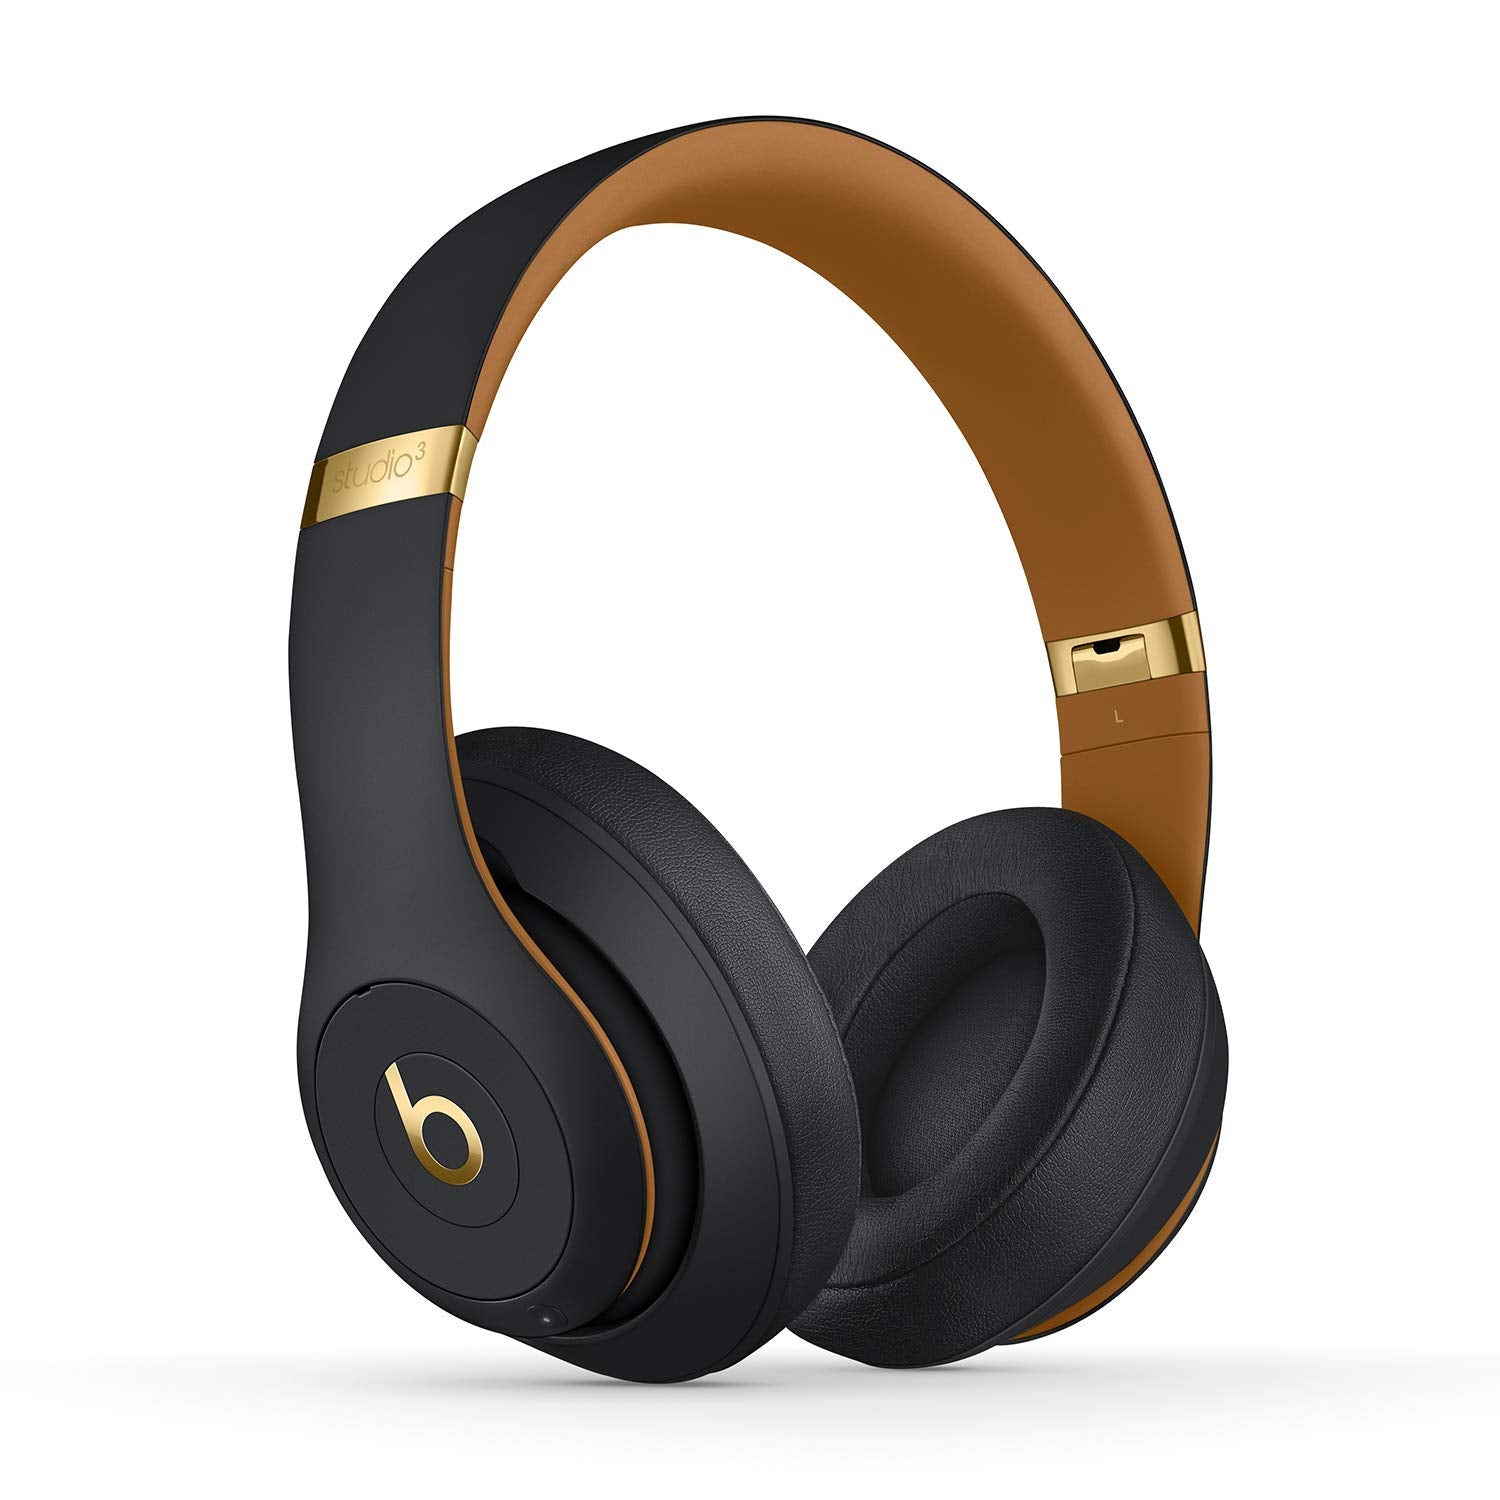 Beats Studio3 Wireless Noise Cancelling Over-Ear Headphones - Apple W1 Headphone Chip, Class 1 Bluetooth, Active Noise Cancelling, 22 Hours Of Listening Time, Built-in Microphone - Midnight Black